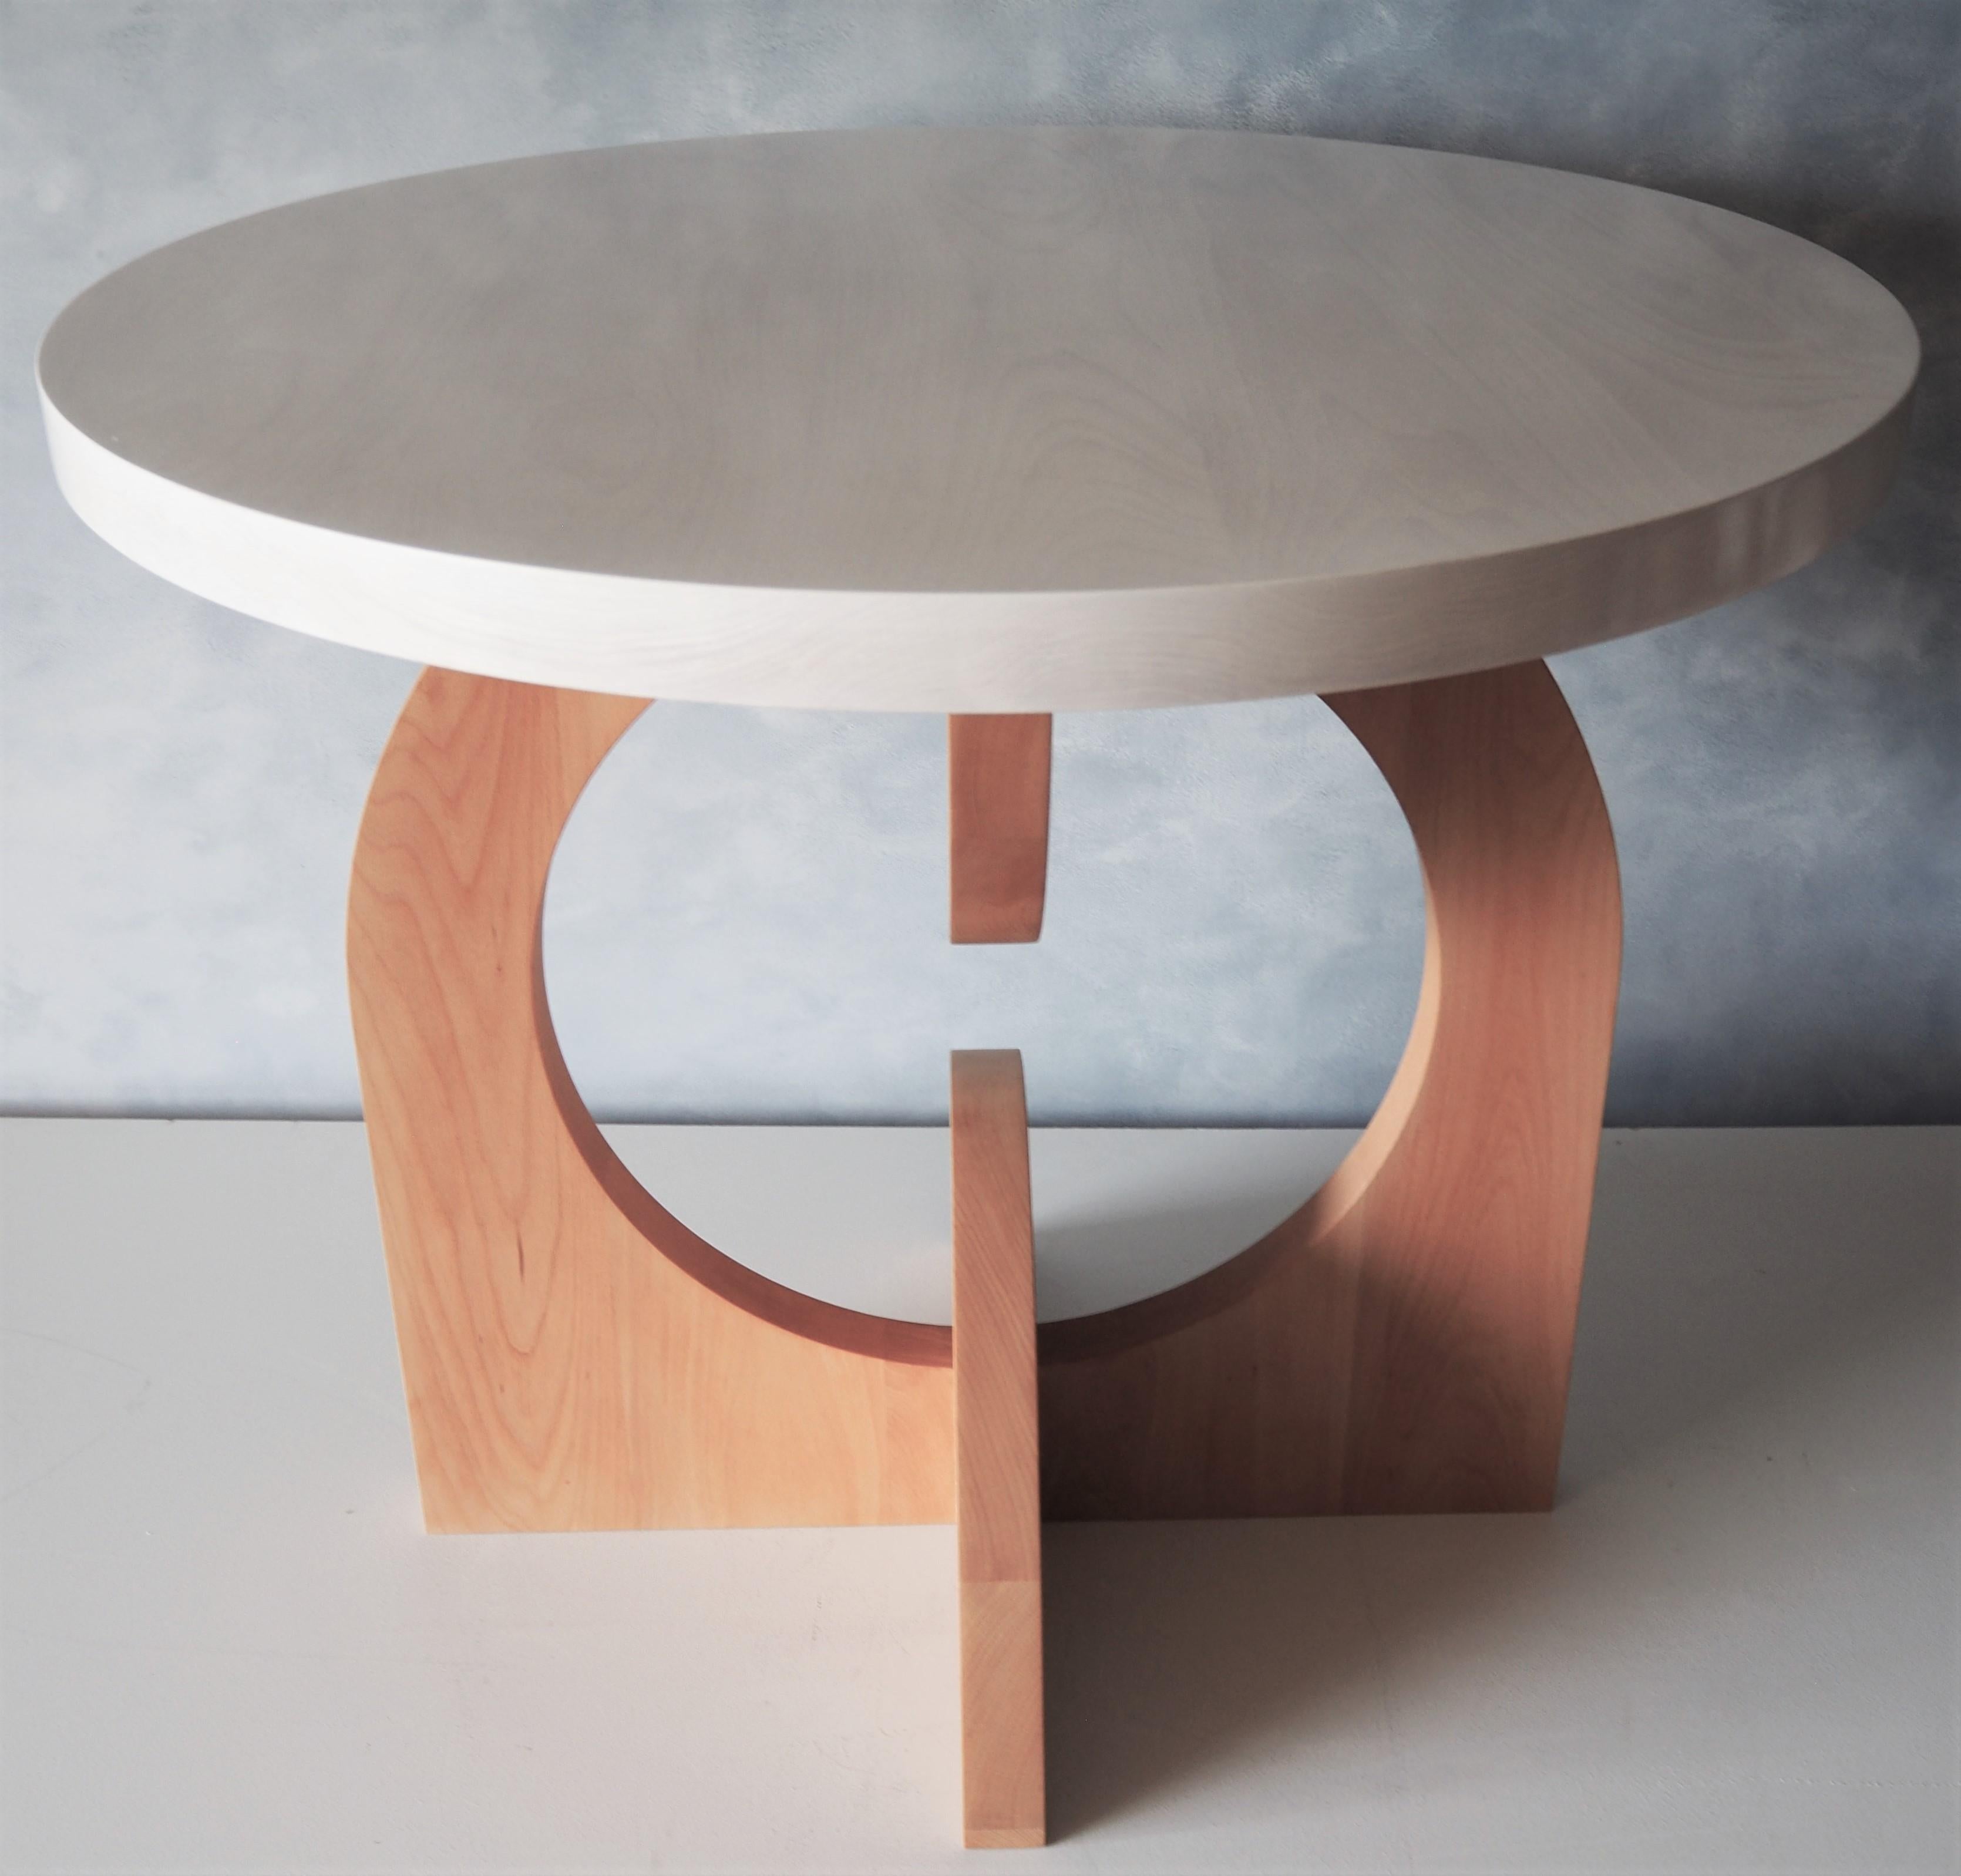 North American White and Beech Round Dual Crescent Dining Table by MSJ Furniture Studio